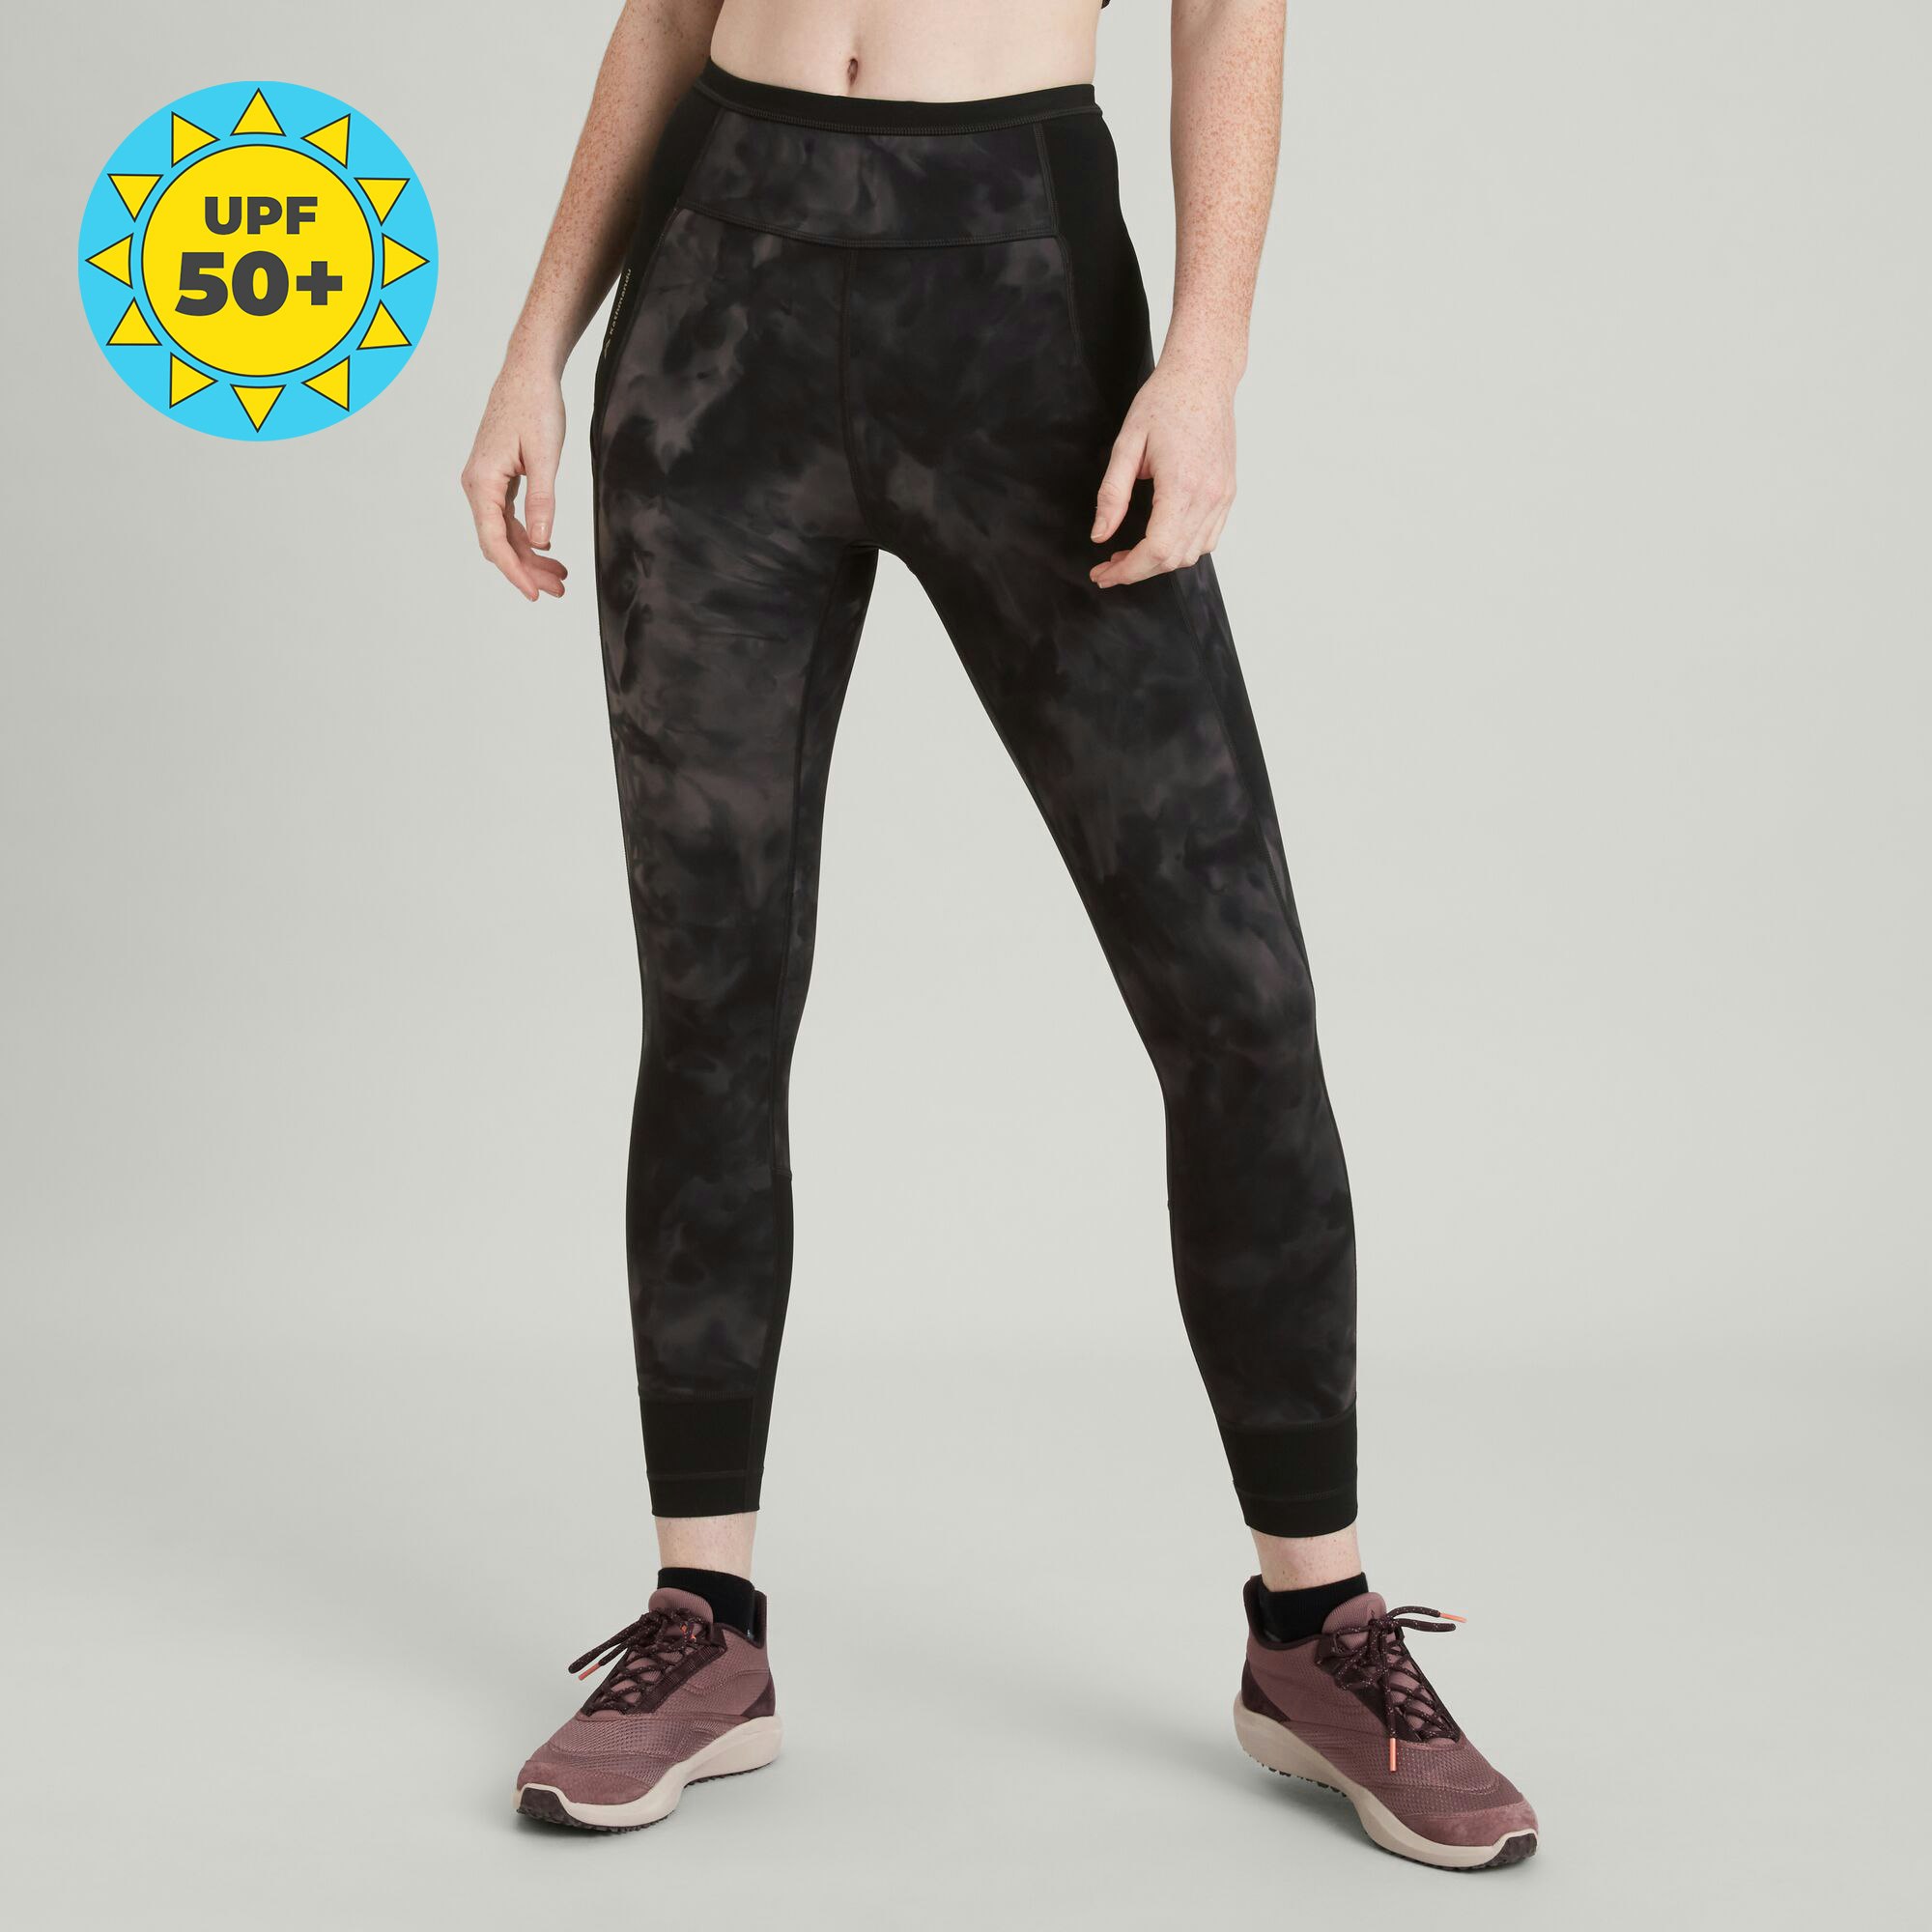 Lululemon cropped leggings 6 - $32 - From Brittany